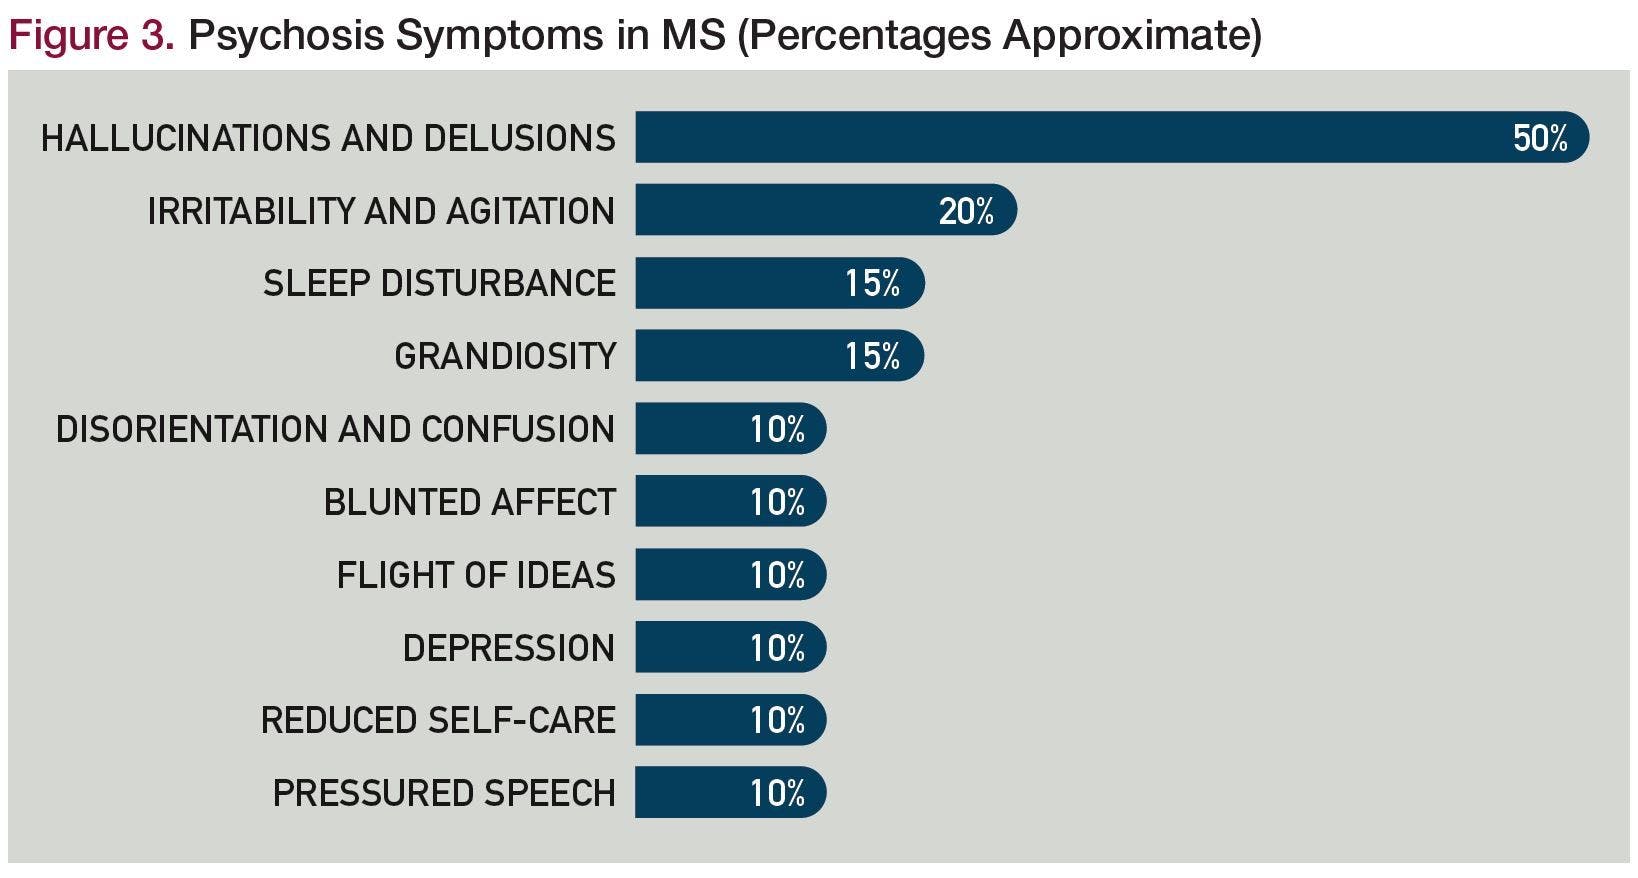 Figure 3. Psychosis Symptoms in MS (Percentages Approximate)